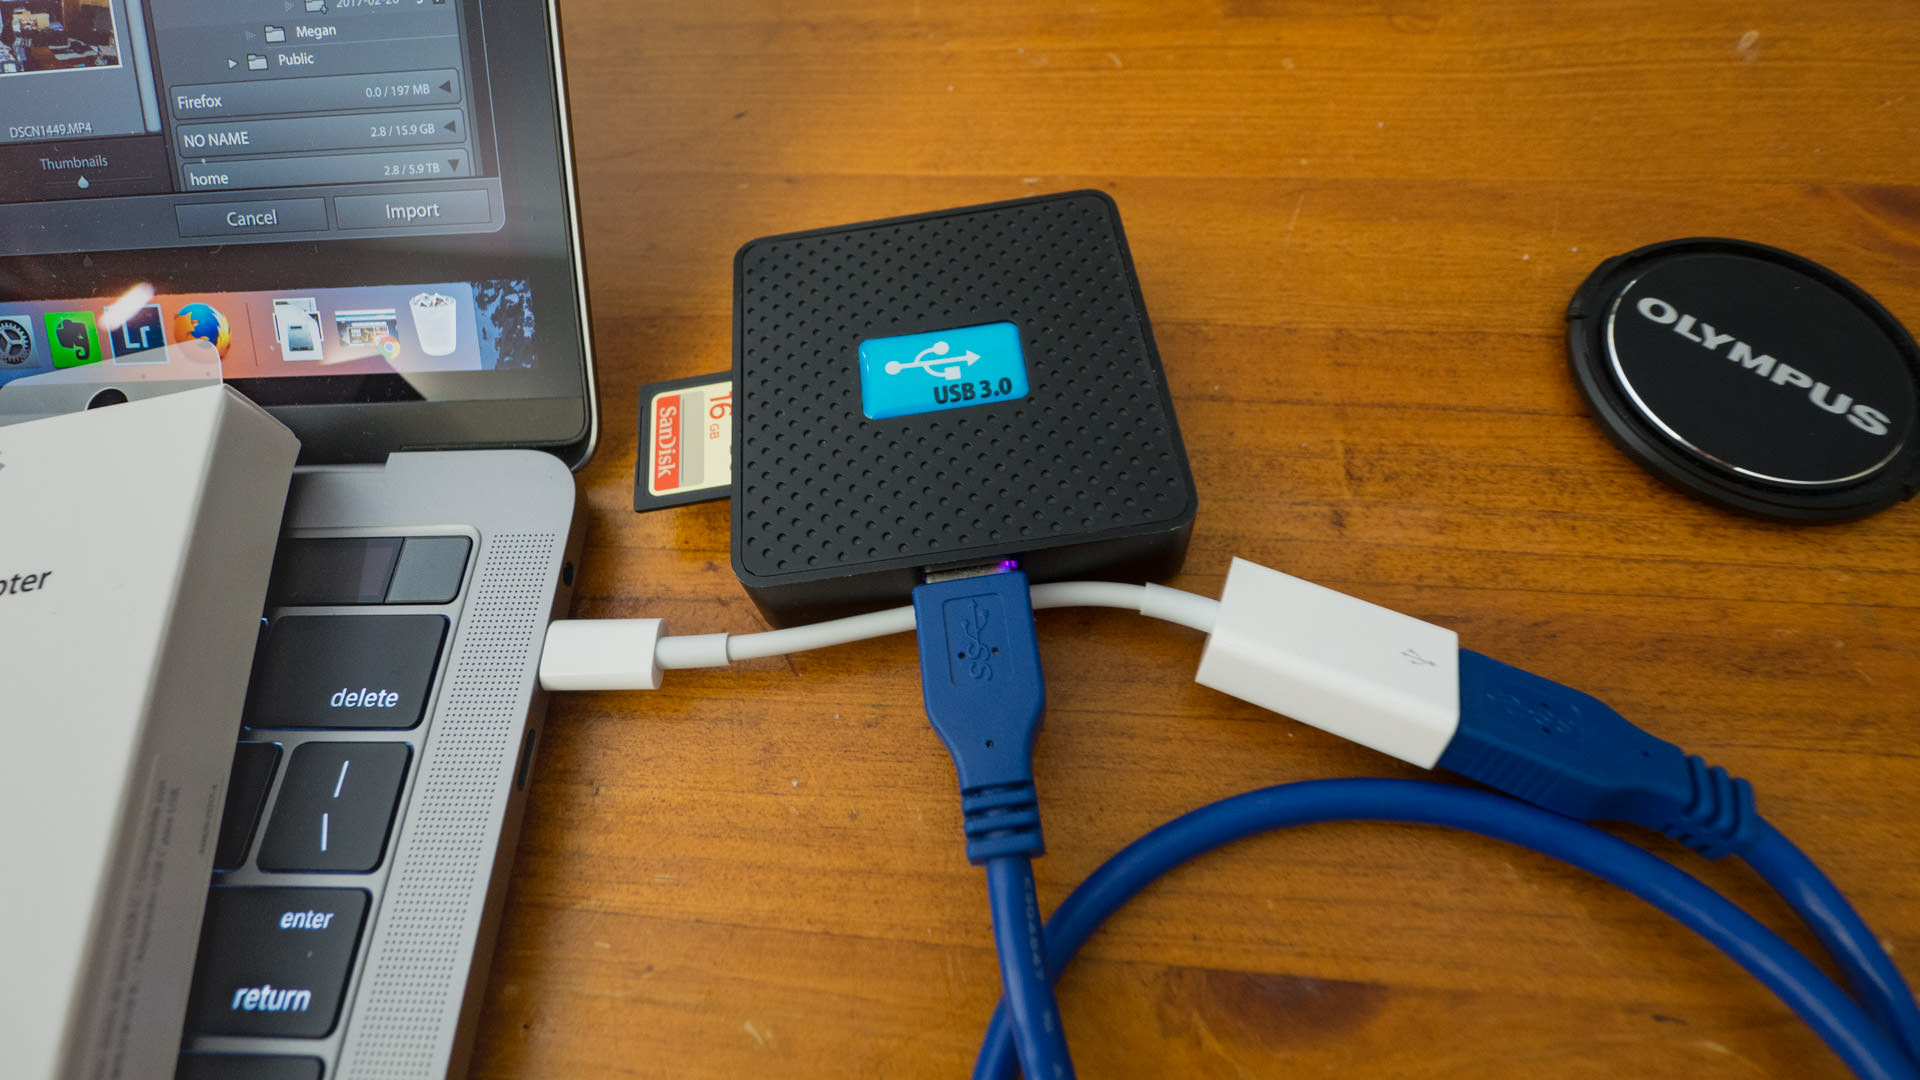 USB to USB-C dongle to connect my card reader